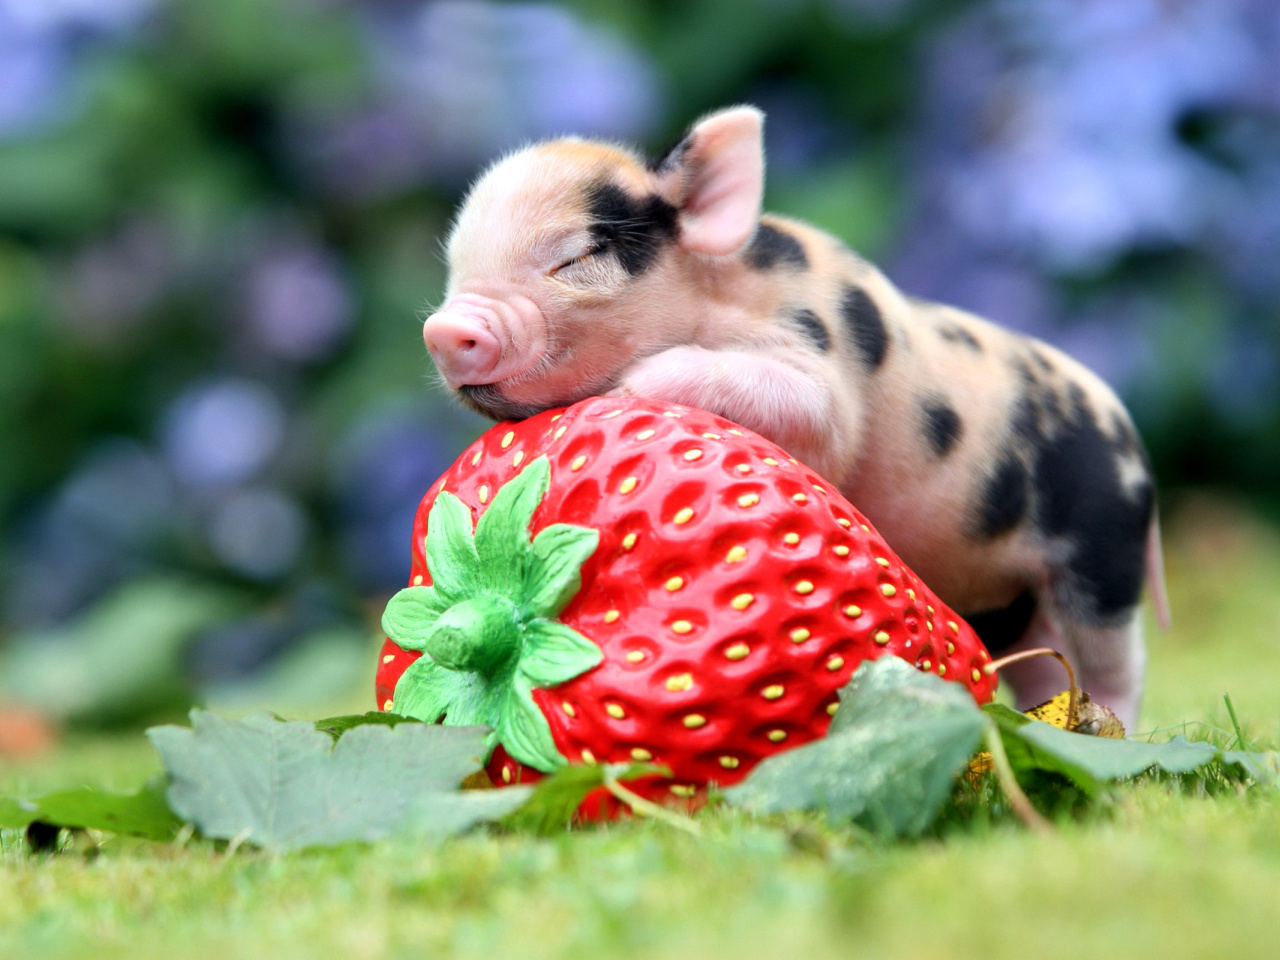 Pig and Strawberry wallpaper 1280x960